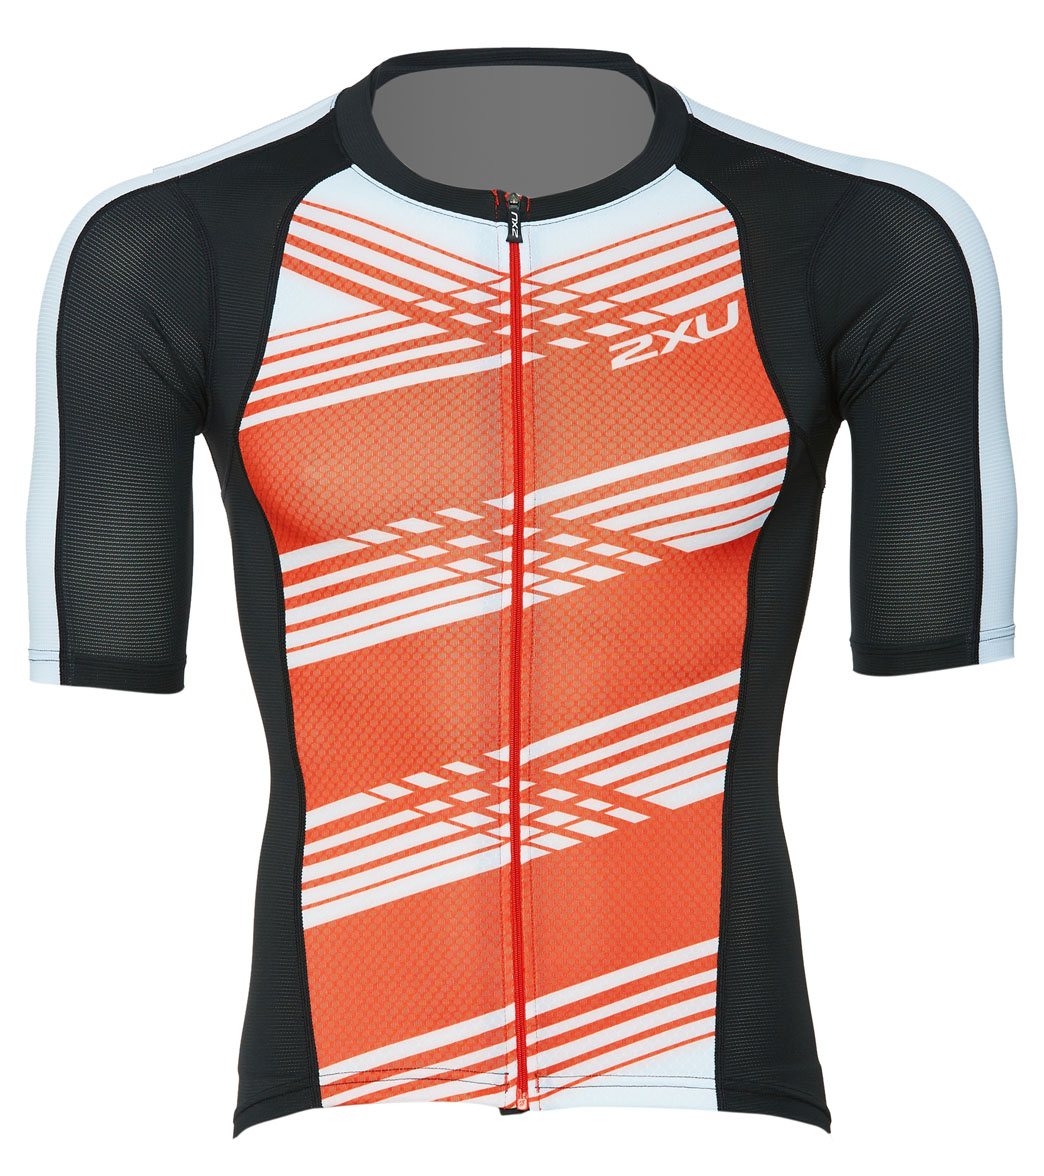 2Xu Men's Compression Sleeved Tri Top - Black/White Flame Lines Xl - Swimoutlet.com